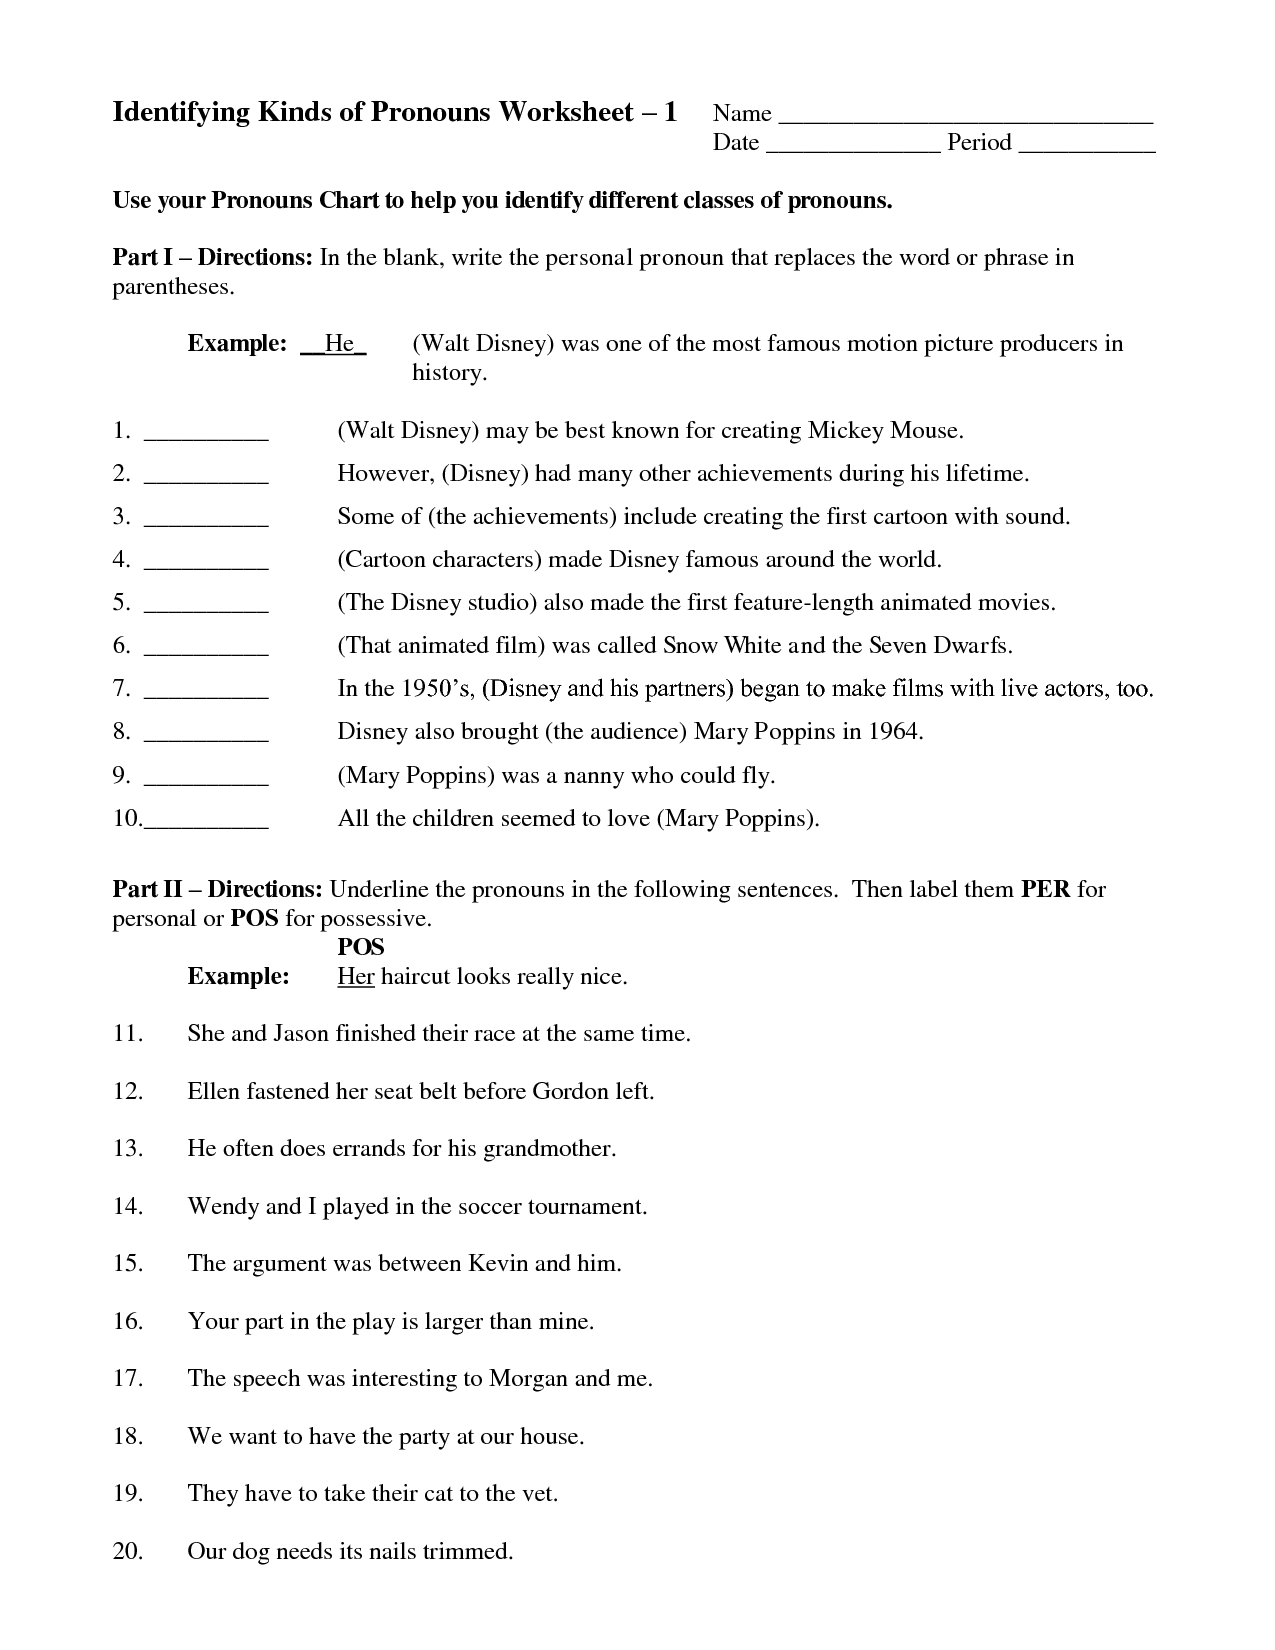 18 Best Images Of 7 Types Of Pronouns Worksheets Identifying Pronouns Worksheet Pronoun Types